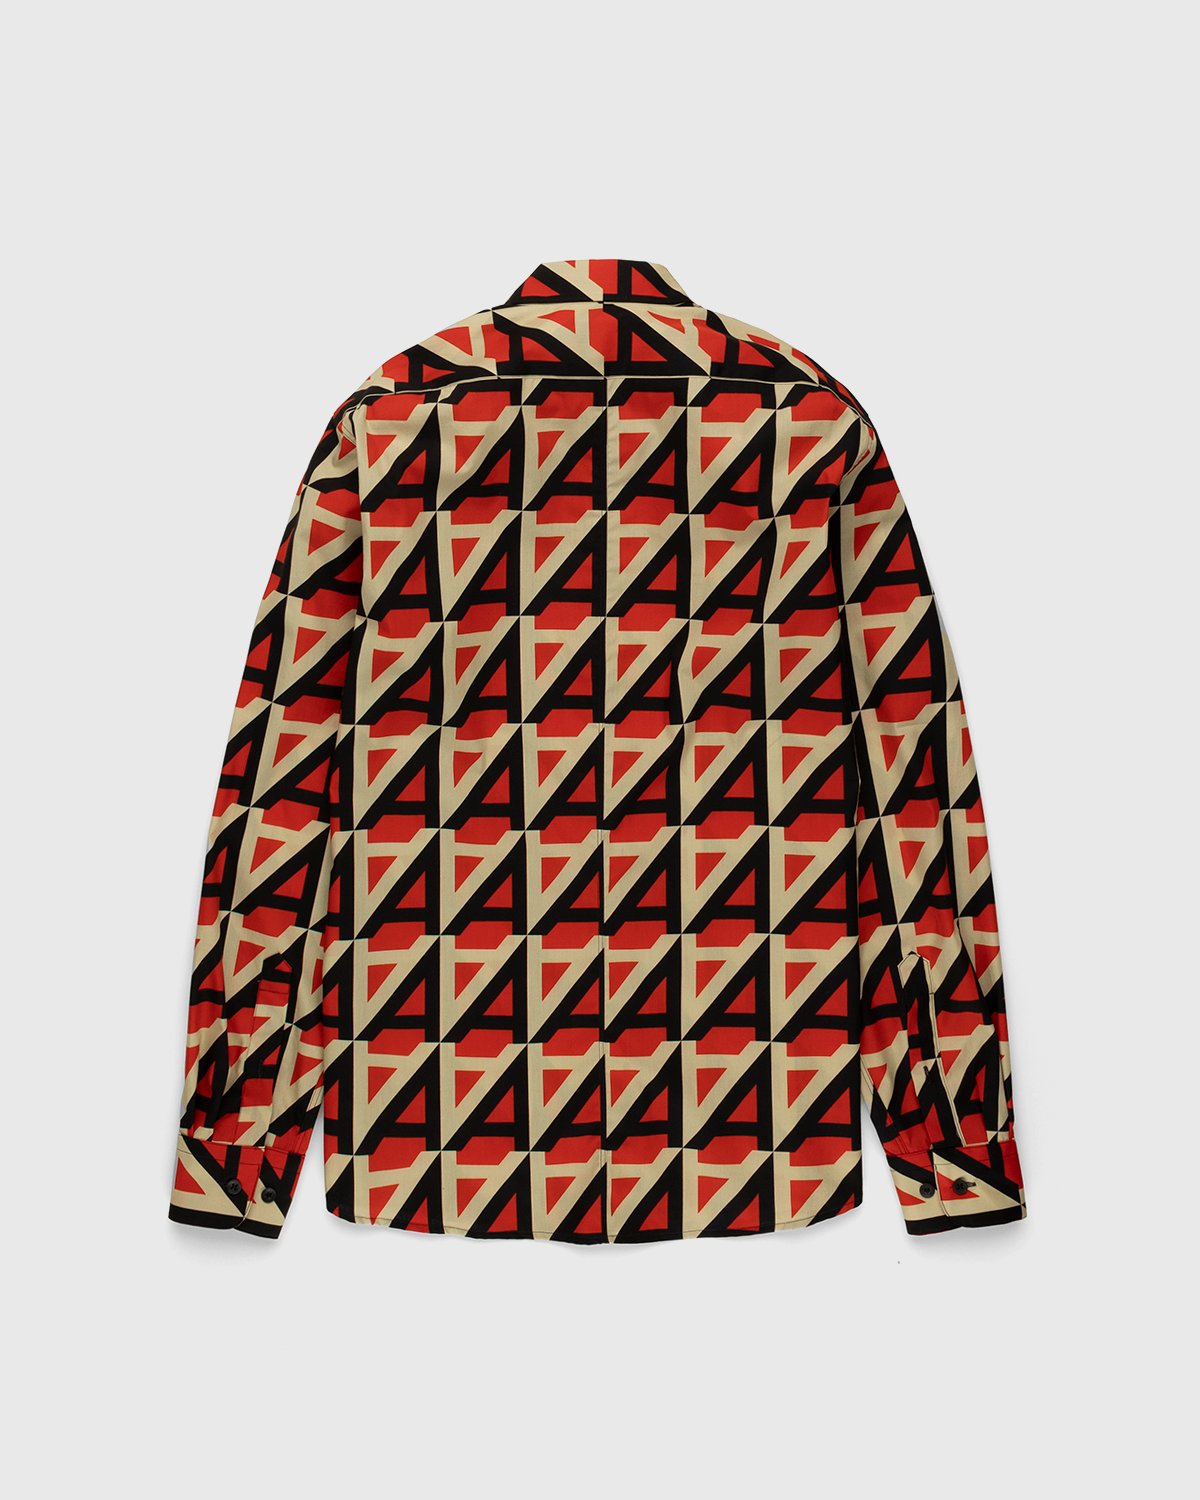 Dries van Noten - Curle "A" Shirt Red - Clothing - Red - Image 2